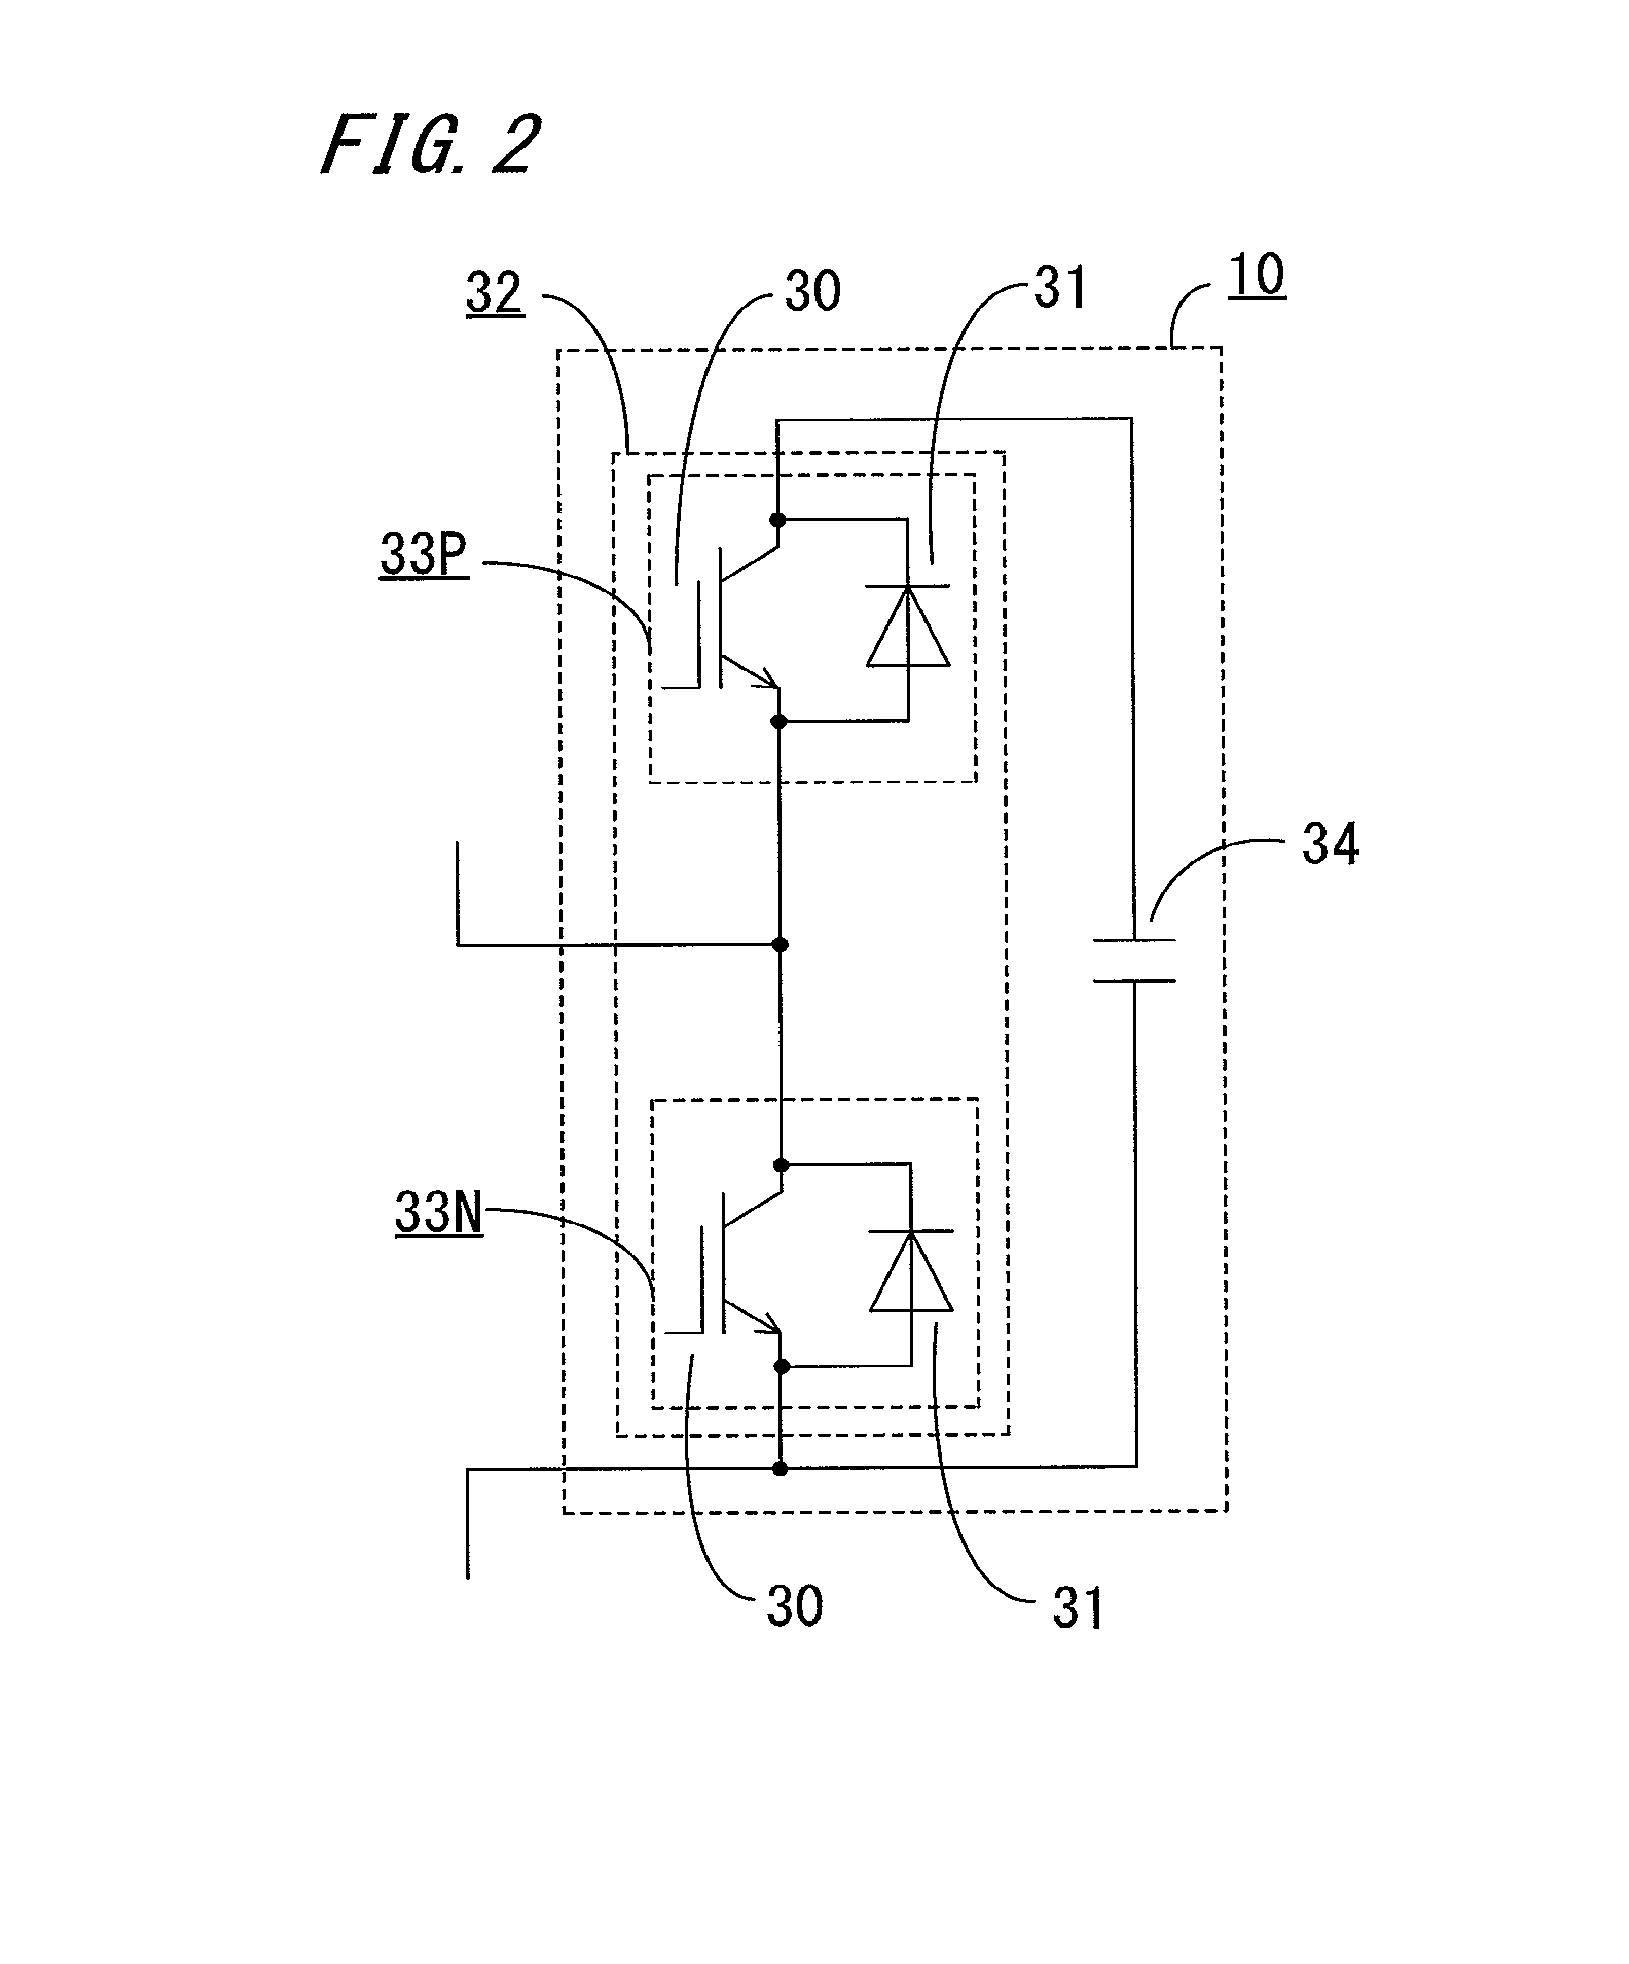 Direct-current power transmission power conversion device and direct-current power transmission power conversion method